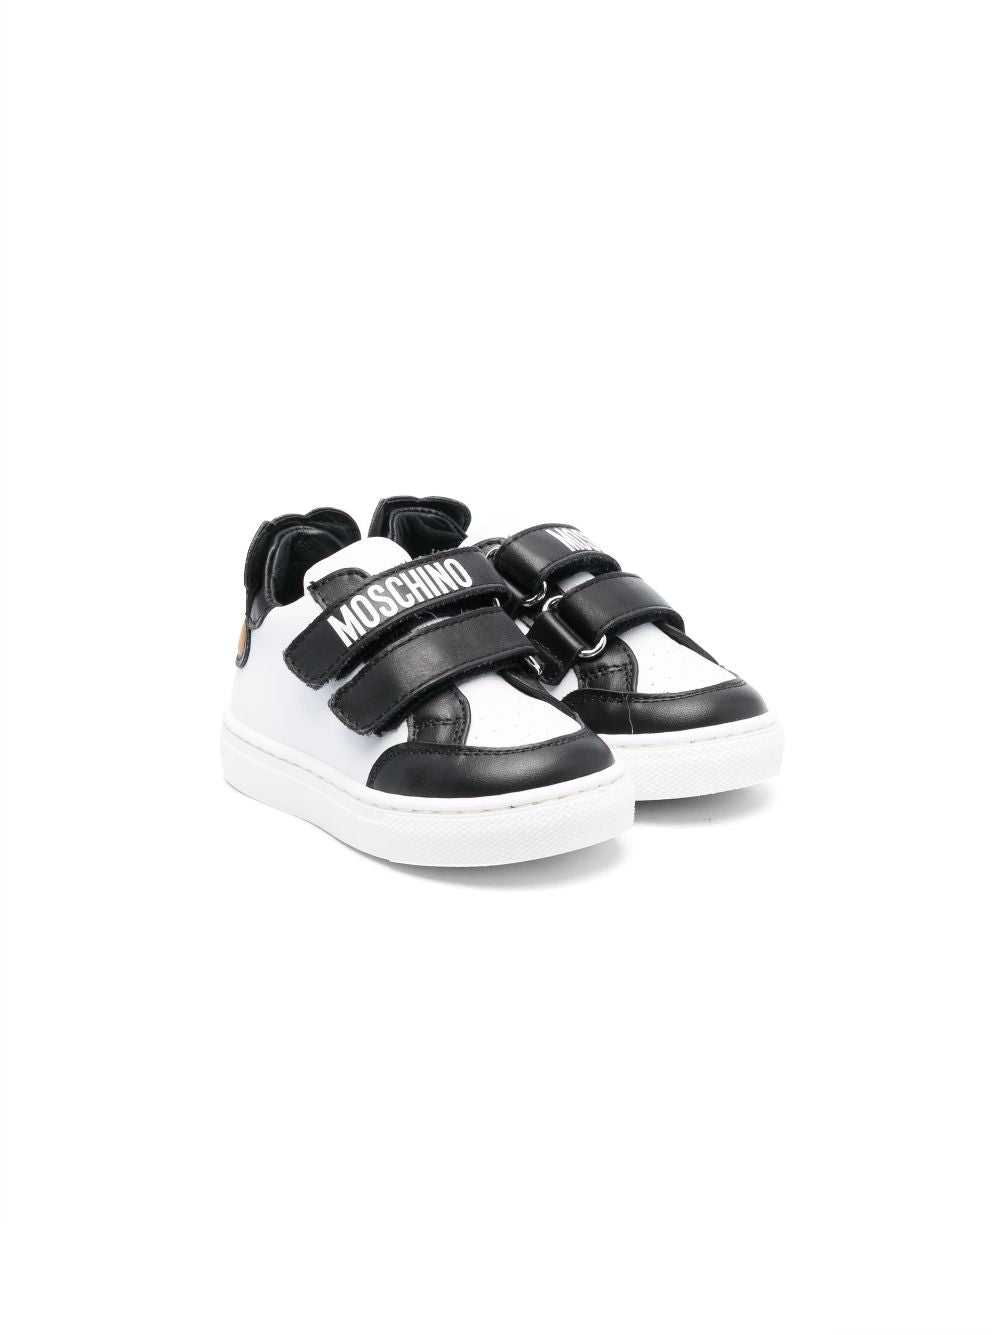 Black and white sneakers for children with logo